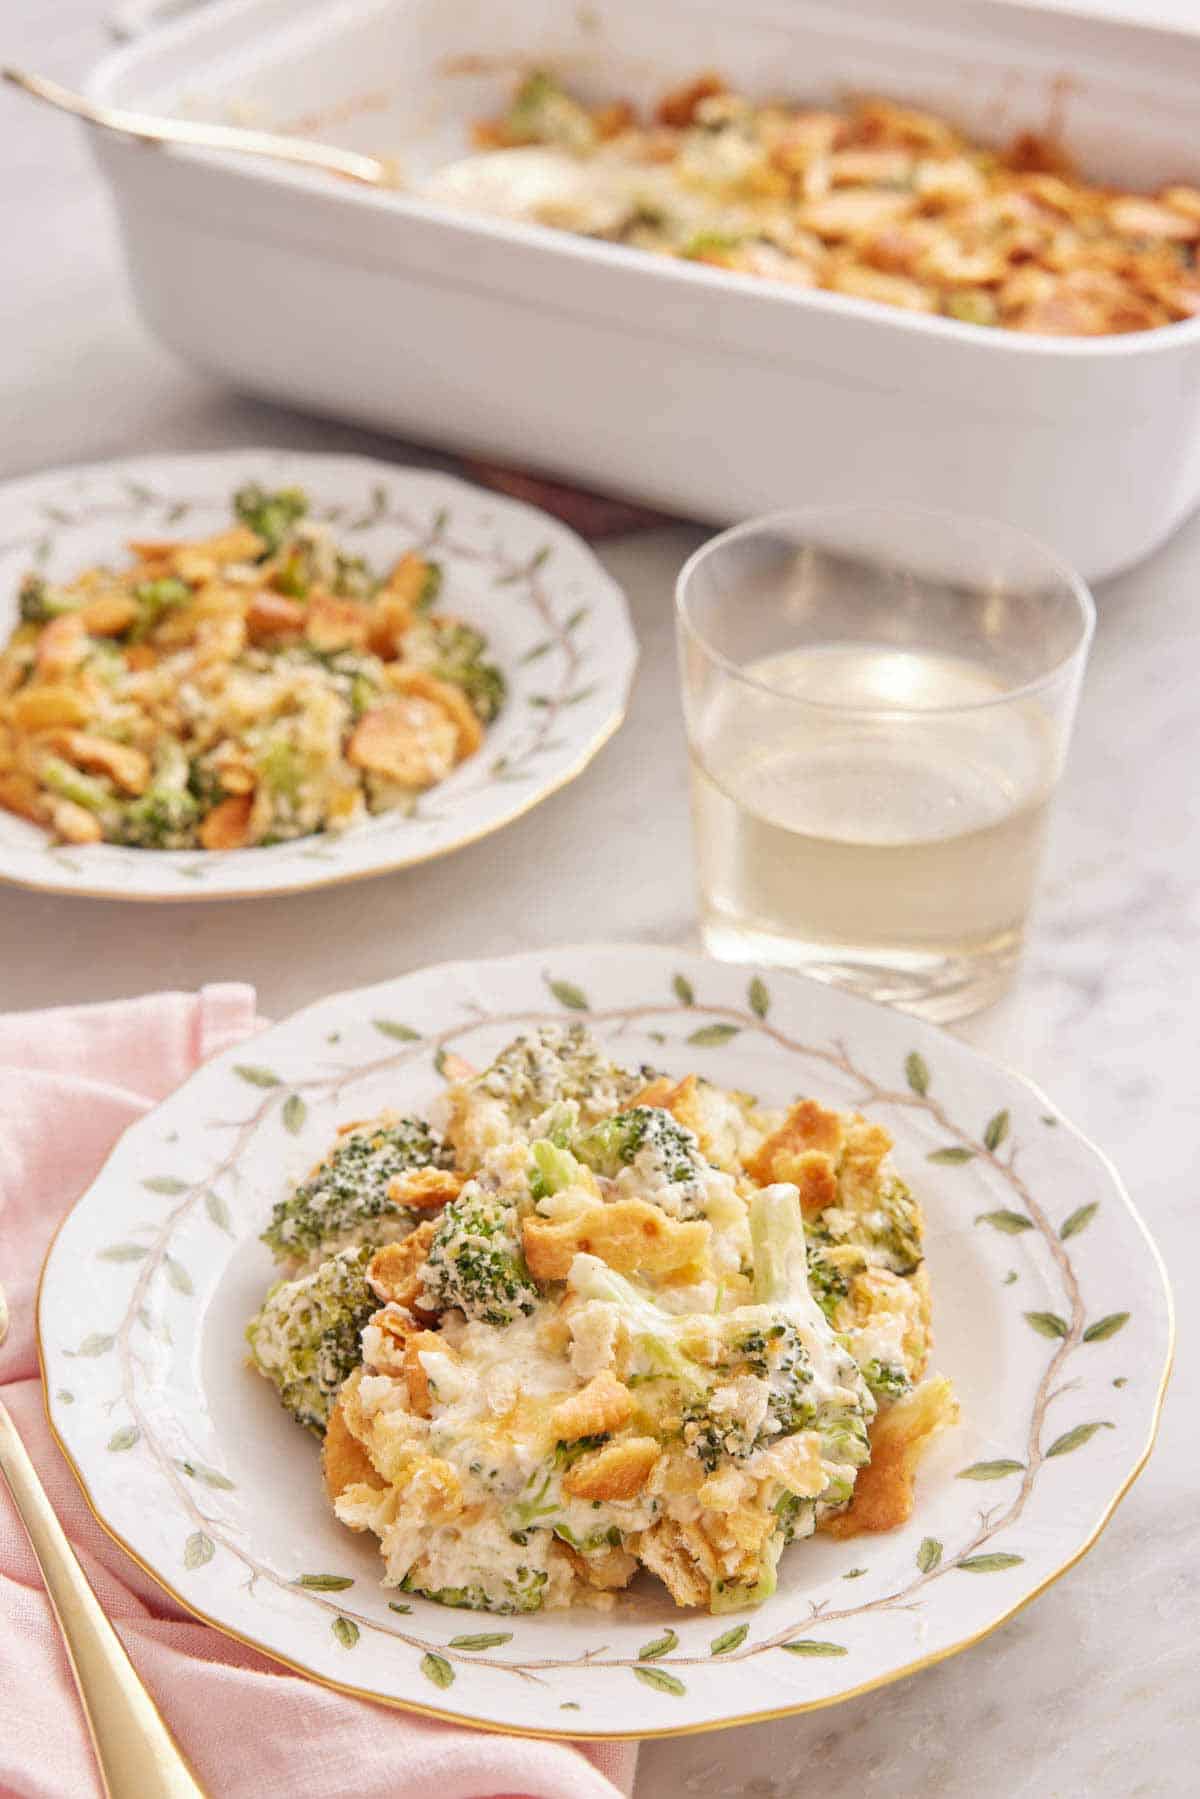 Two plates of broccoli casserole with a glass of wine inbetween and a baking dish in the back.